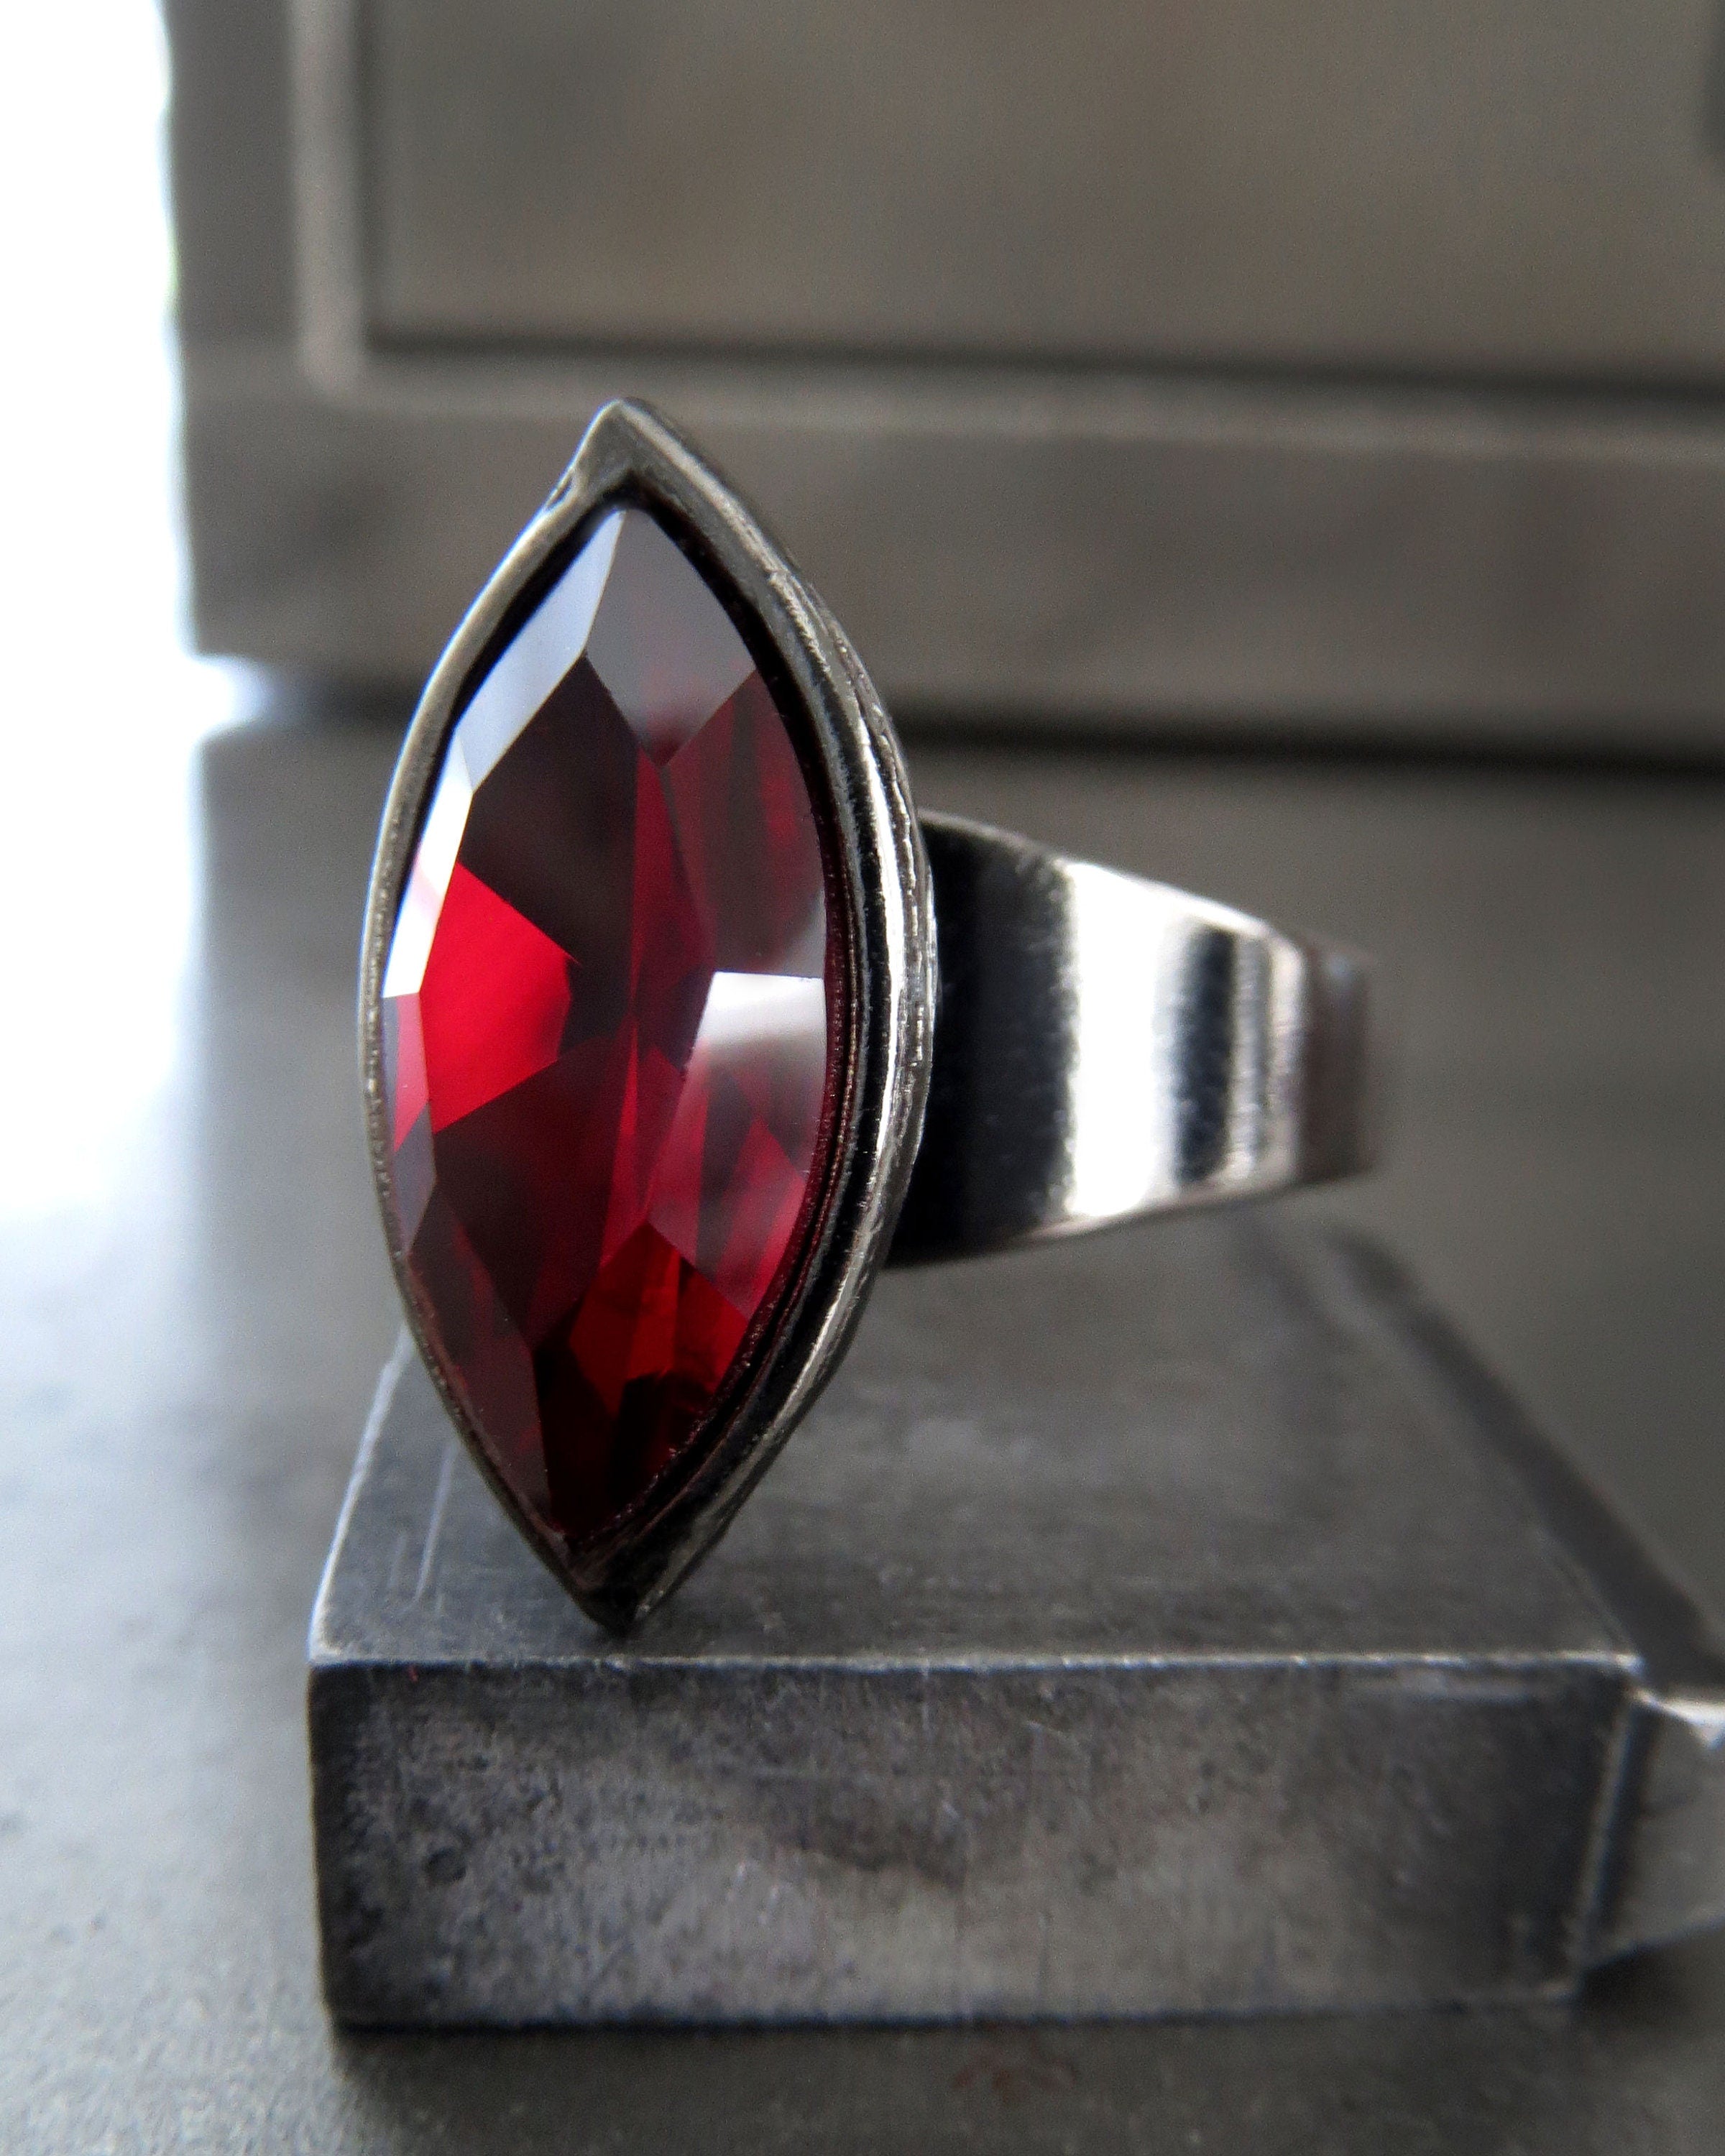 DROP of BLOOD - Gothic Deep Red Crystal Ring, Dark Red Navette Crystal Ring, Marquise Cut Siam Red Crystal Ring, Red Gothic Halloween Ring